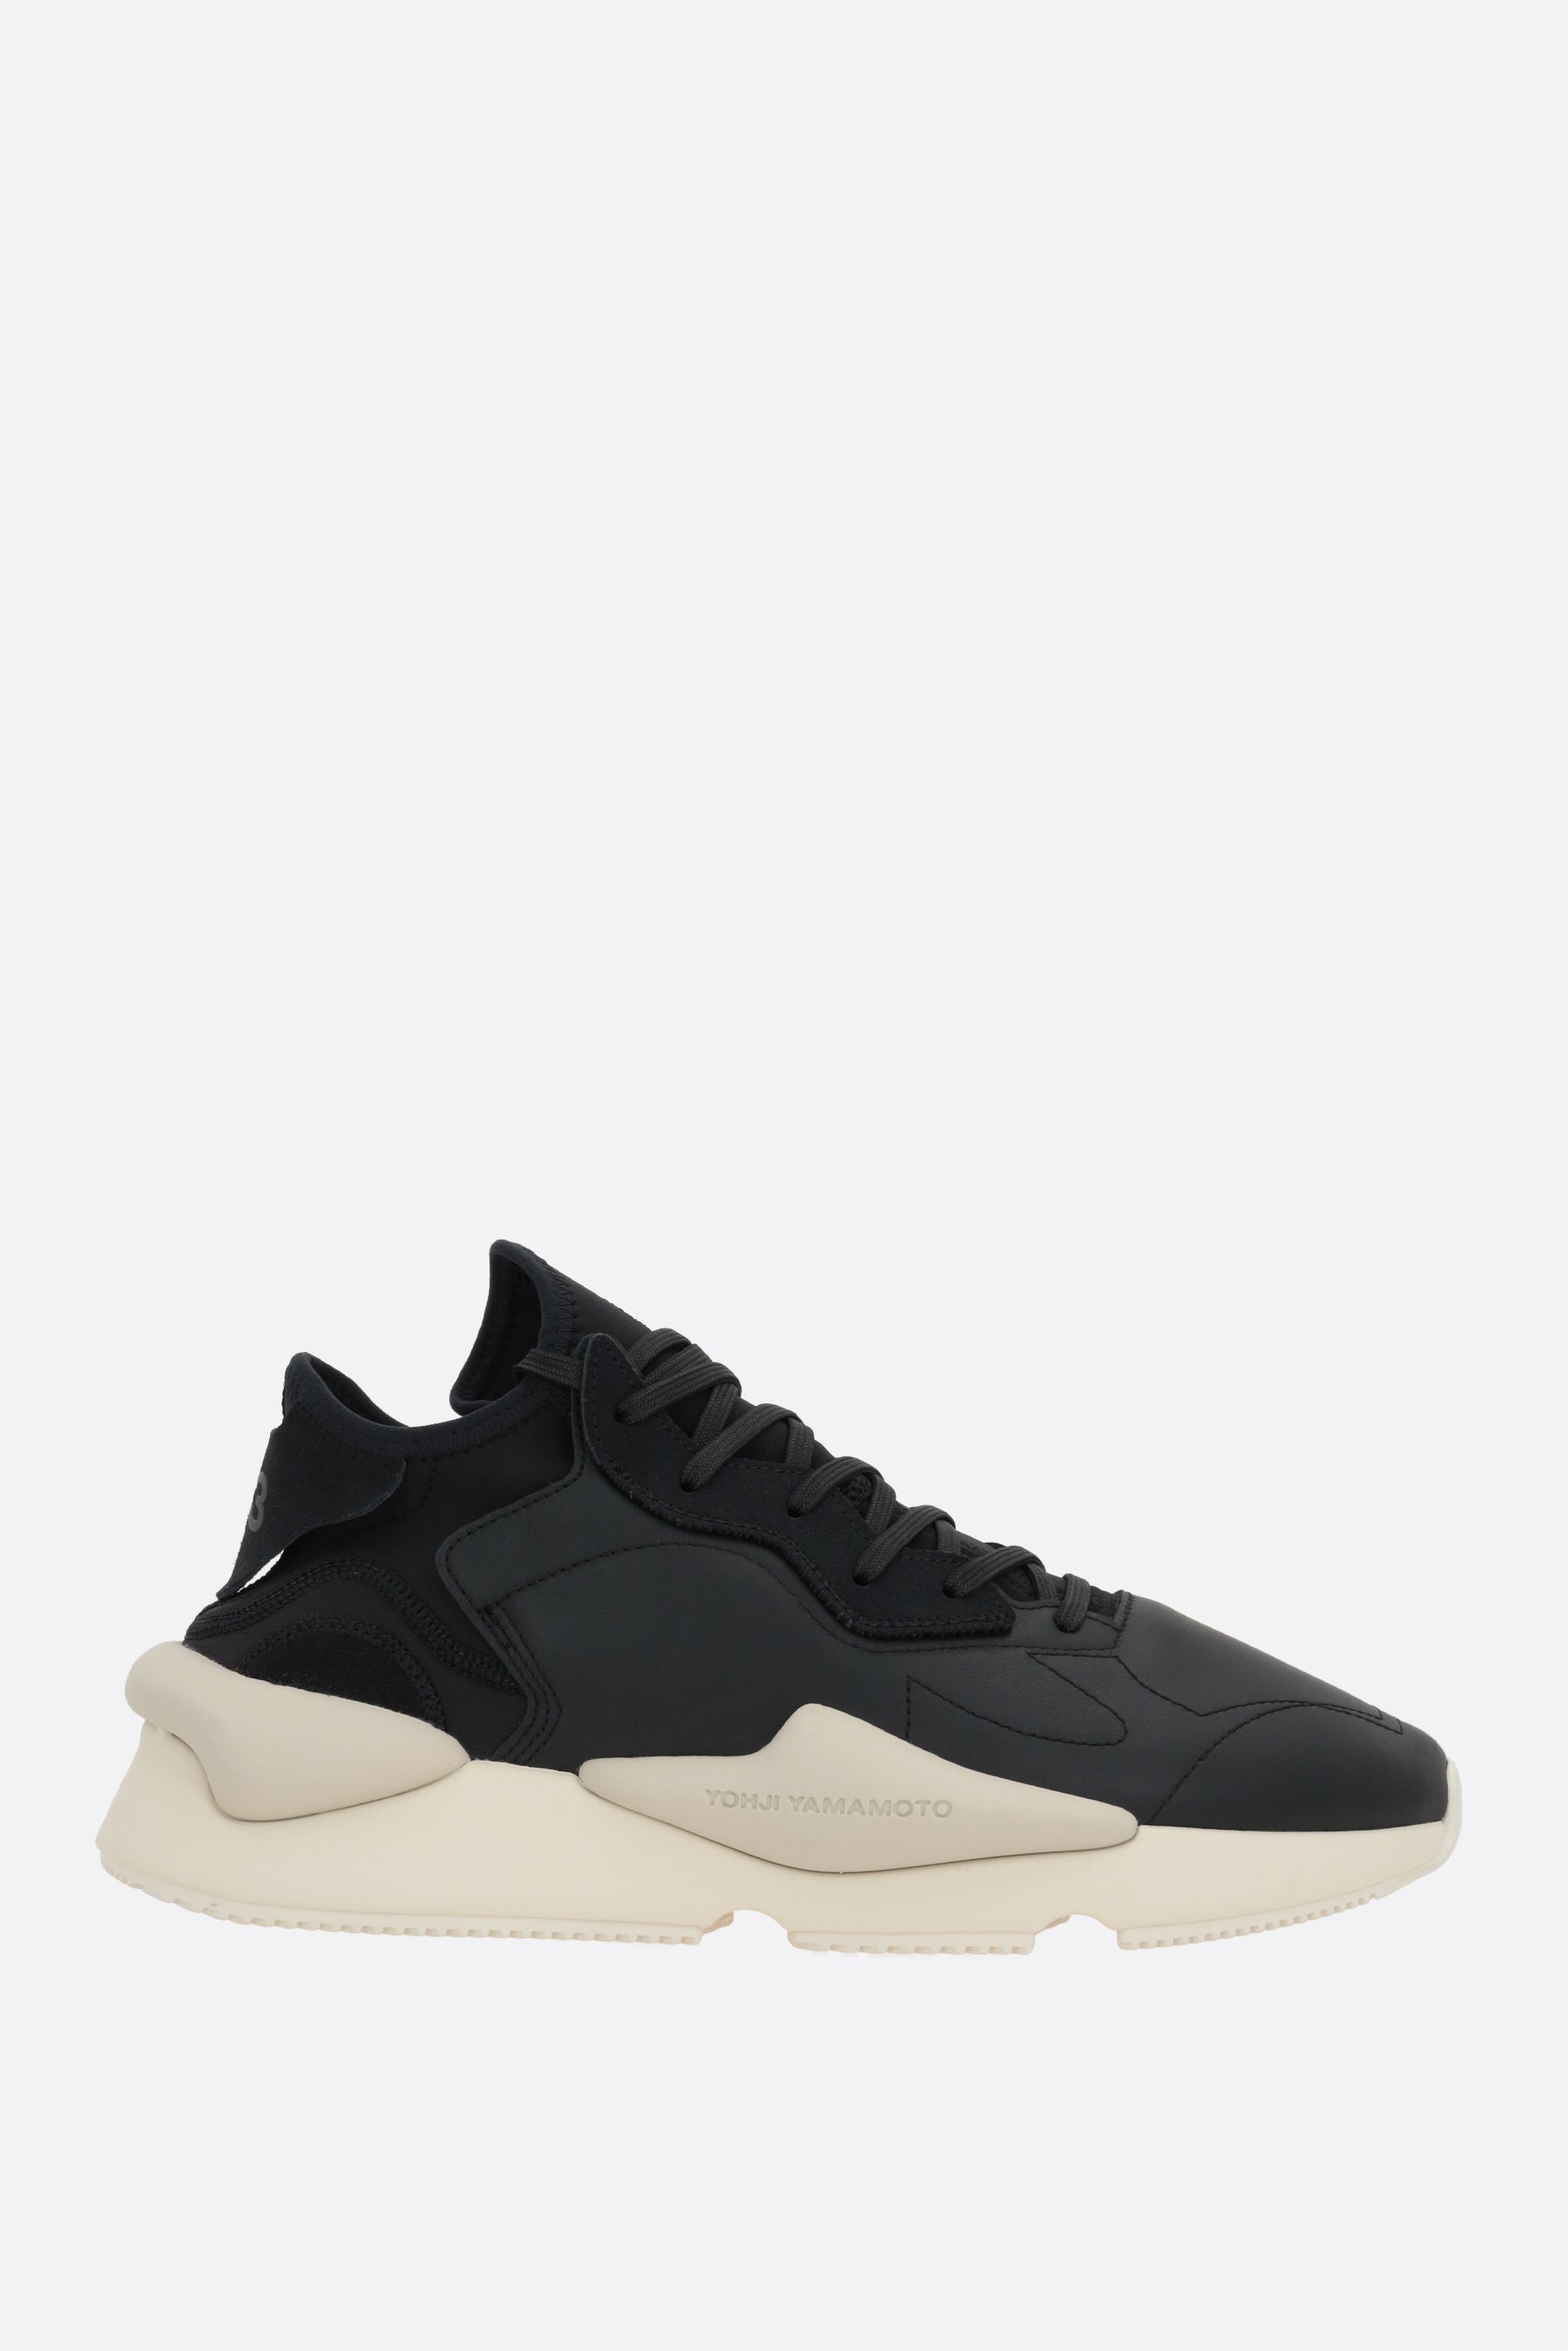 Y-3 Kaiwa smooth leather and neoprene sneakers